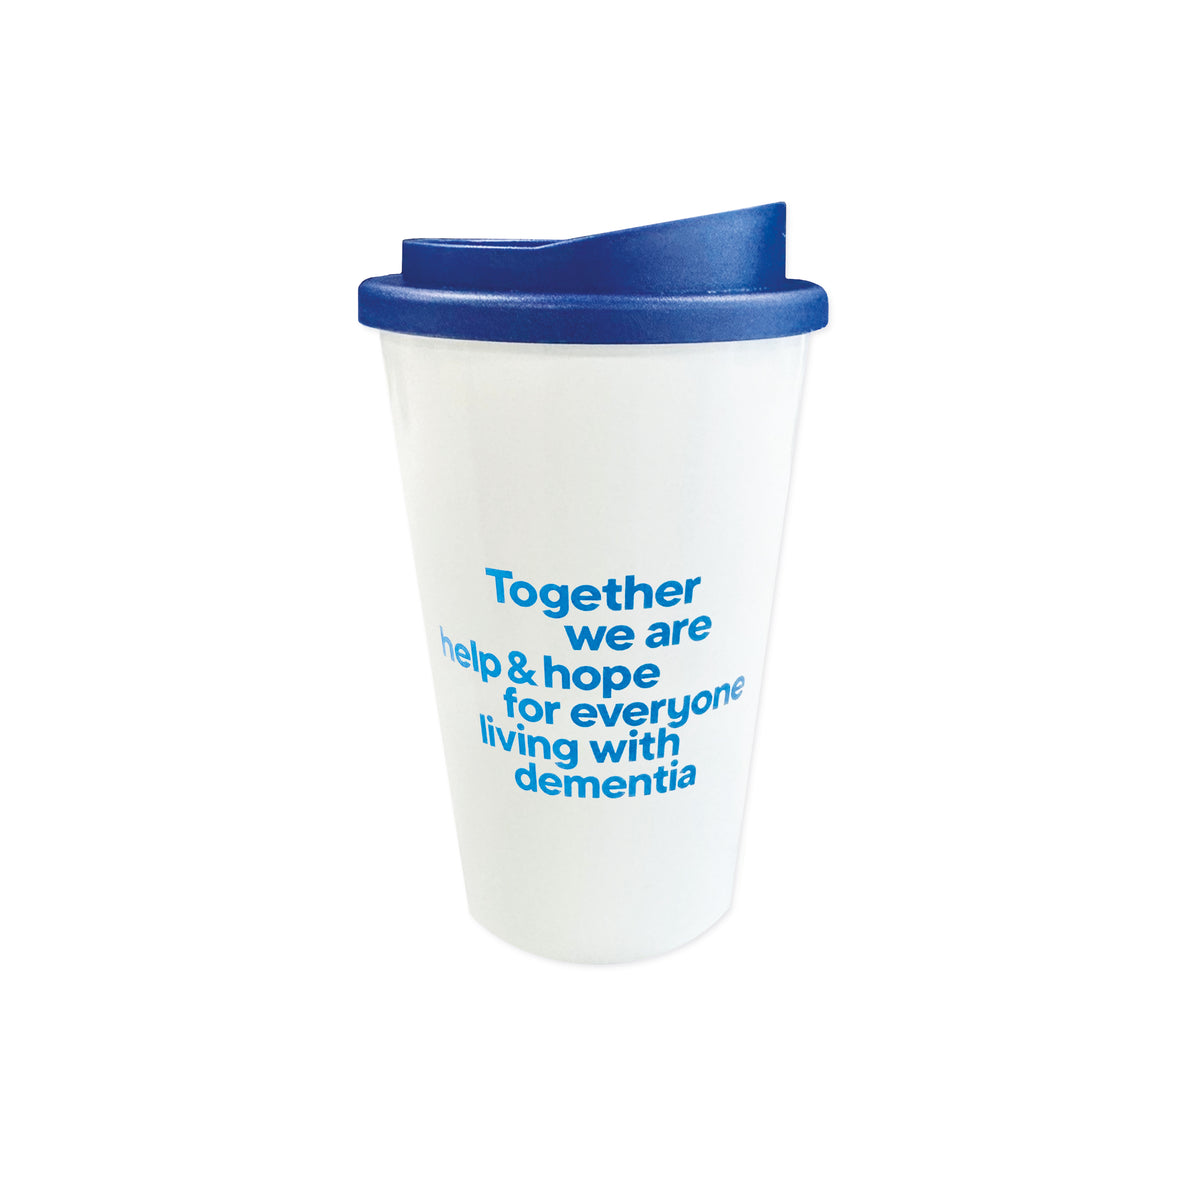 Forget-me-not flower reusable coffee cup